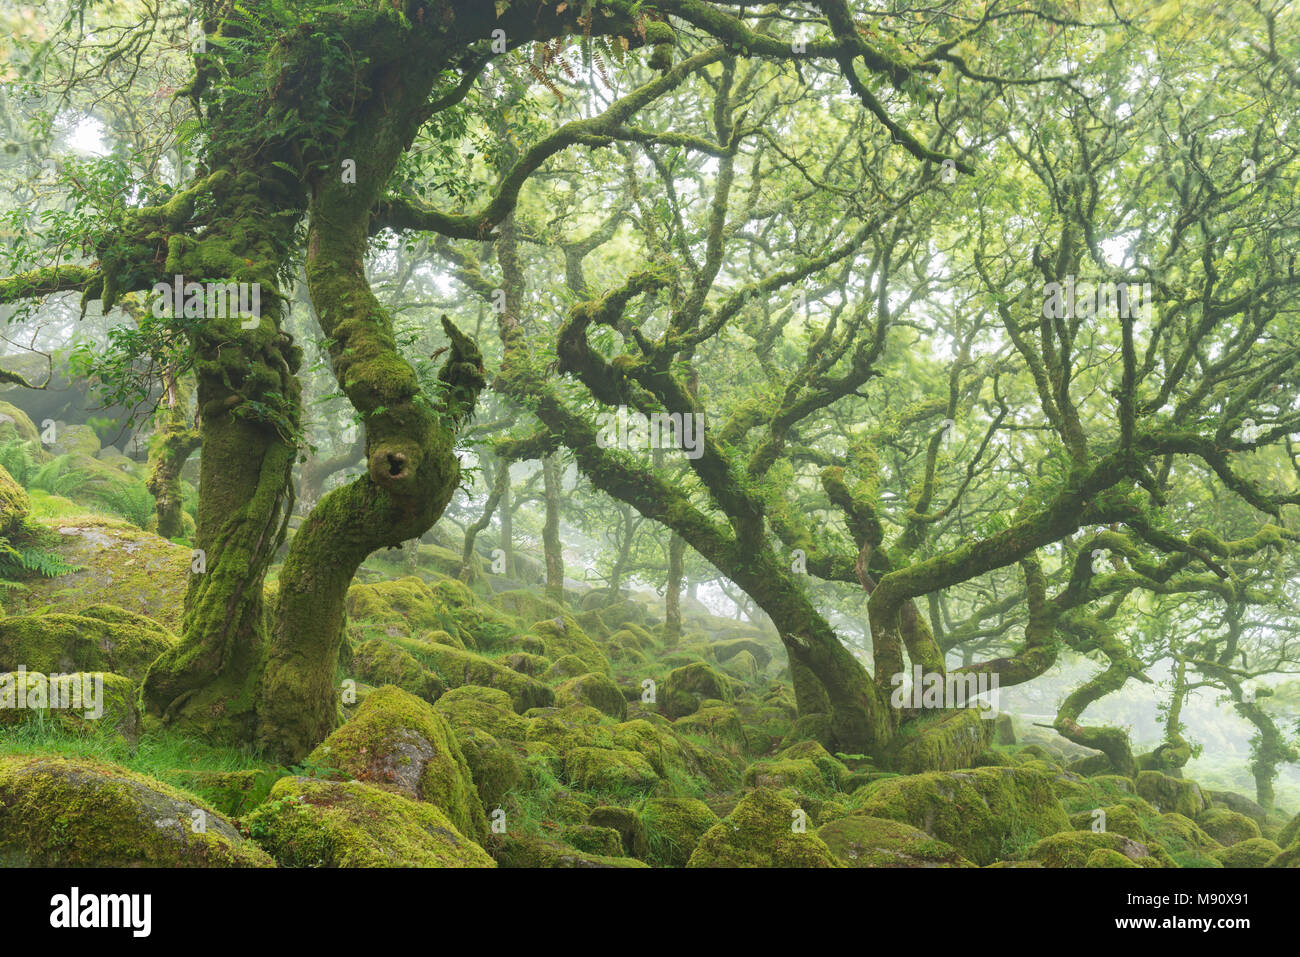 Twisted, moss covered stunted oak trees in Wistman’s Wood SSSI, Dartmoor National Park, Devon, England. Summer (July) 2017. Stock Photo